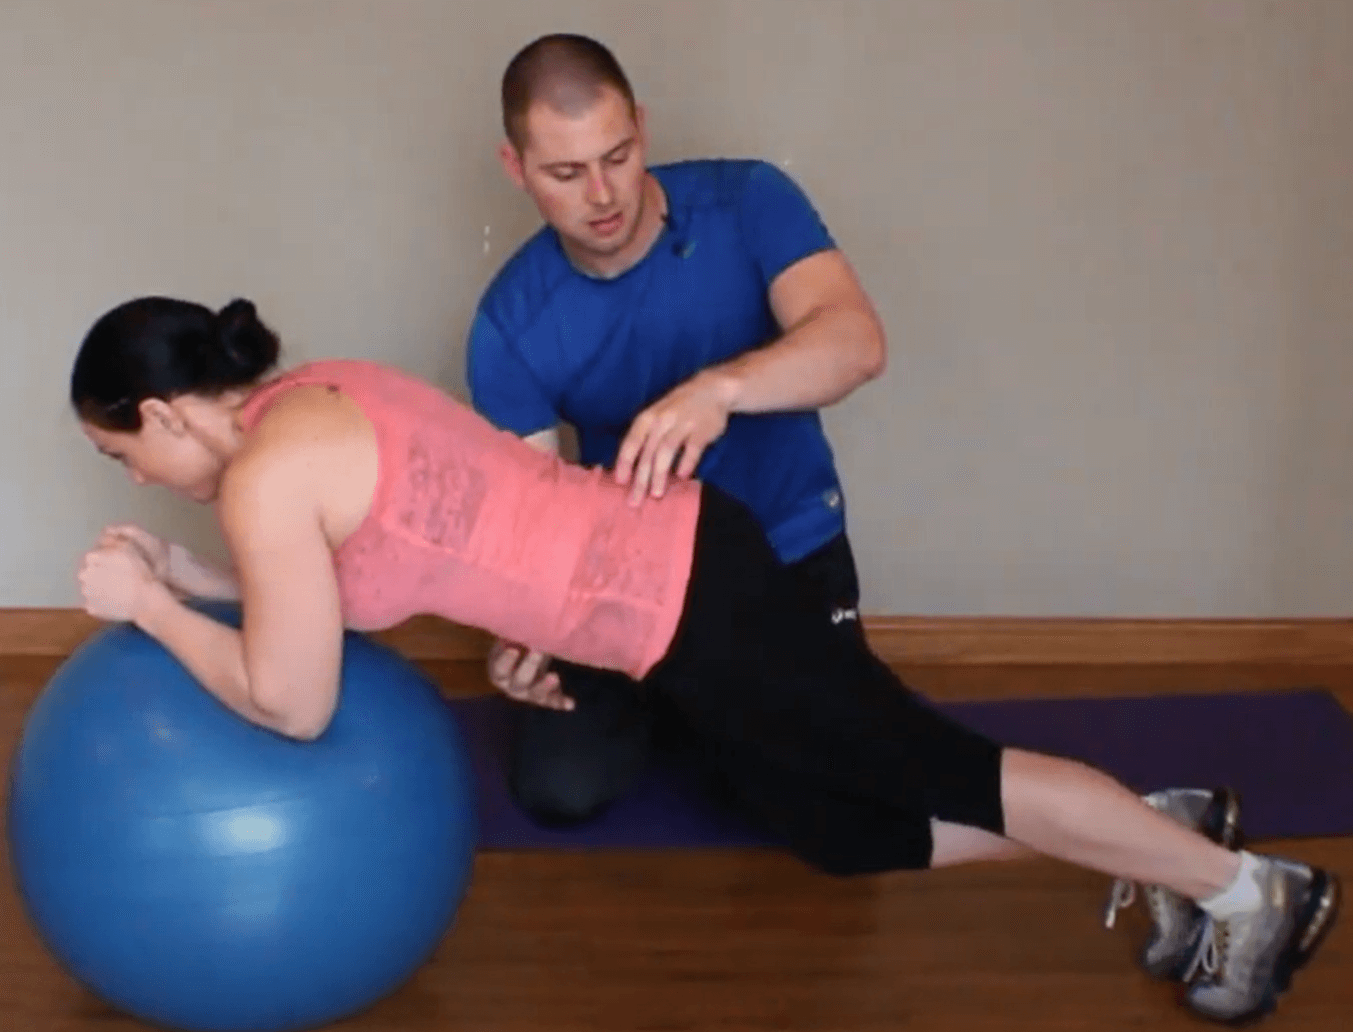 Plank on a stability ball